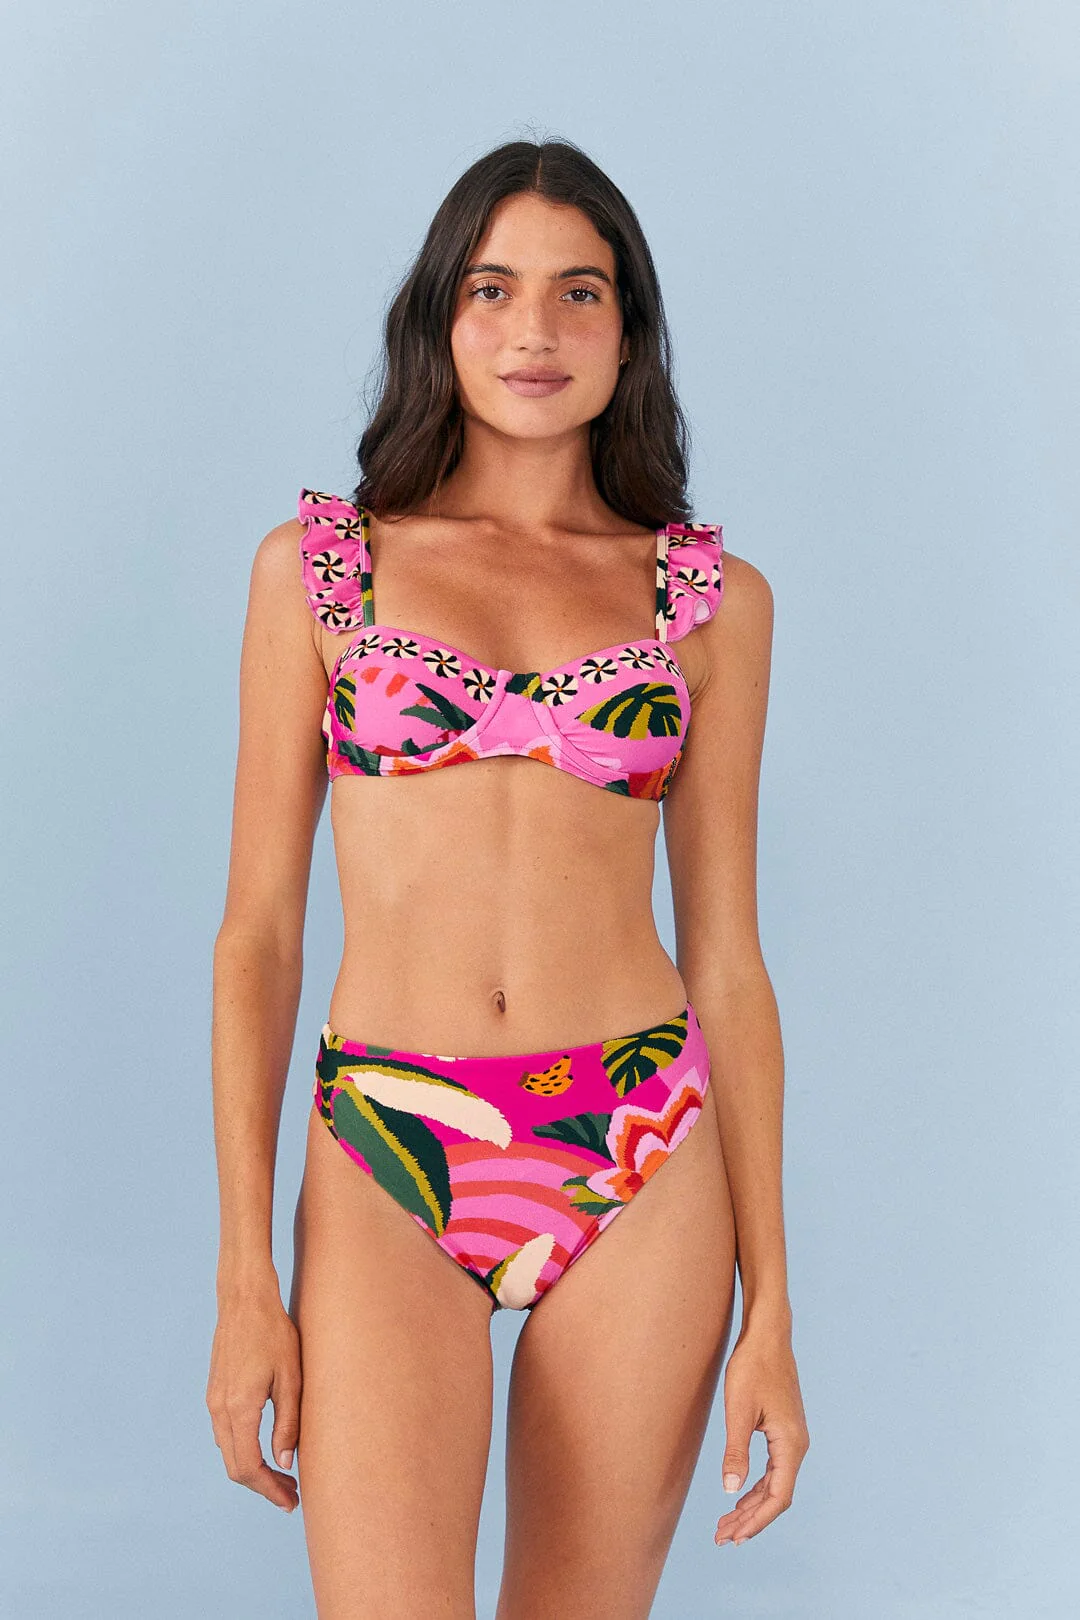 The Underwire Bikini Top Trend: Embrace Support and Style - Viva Cabana